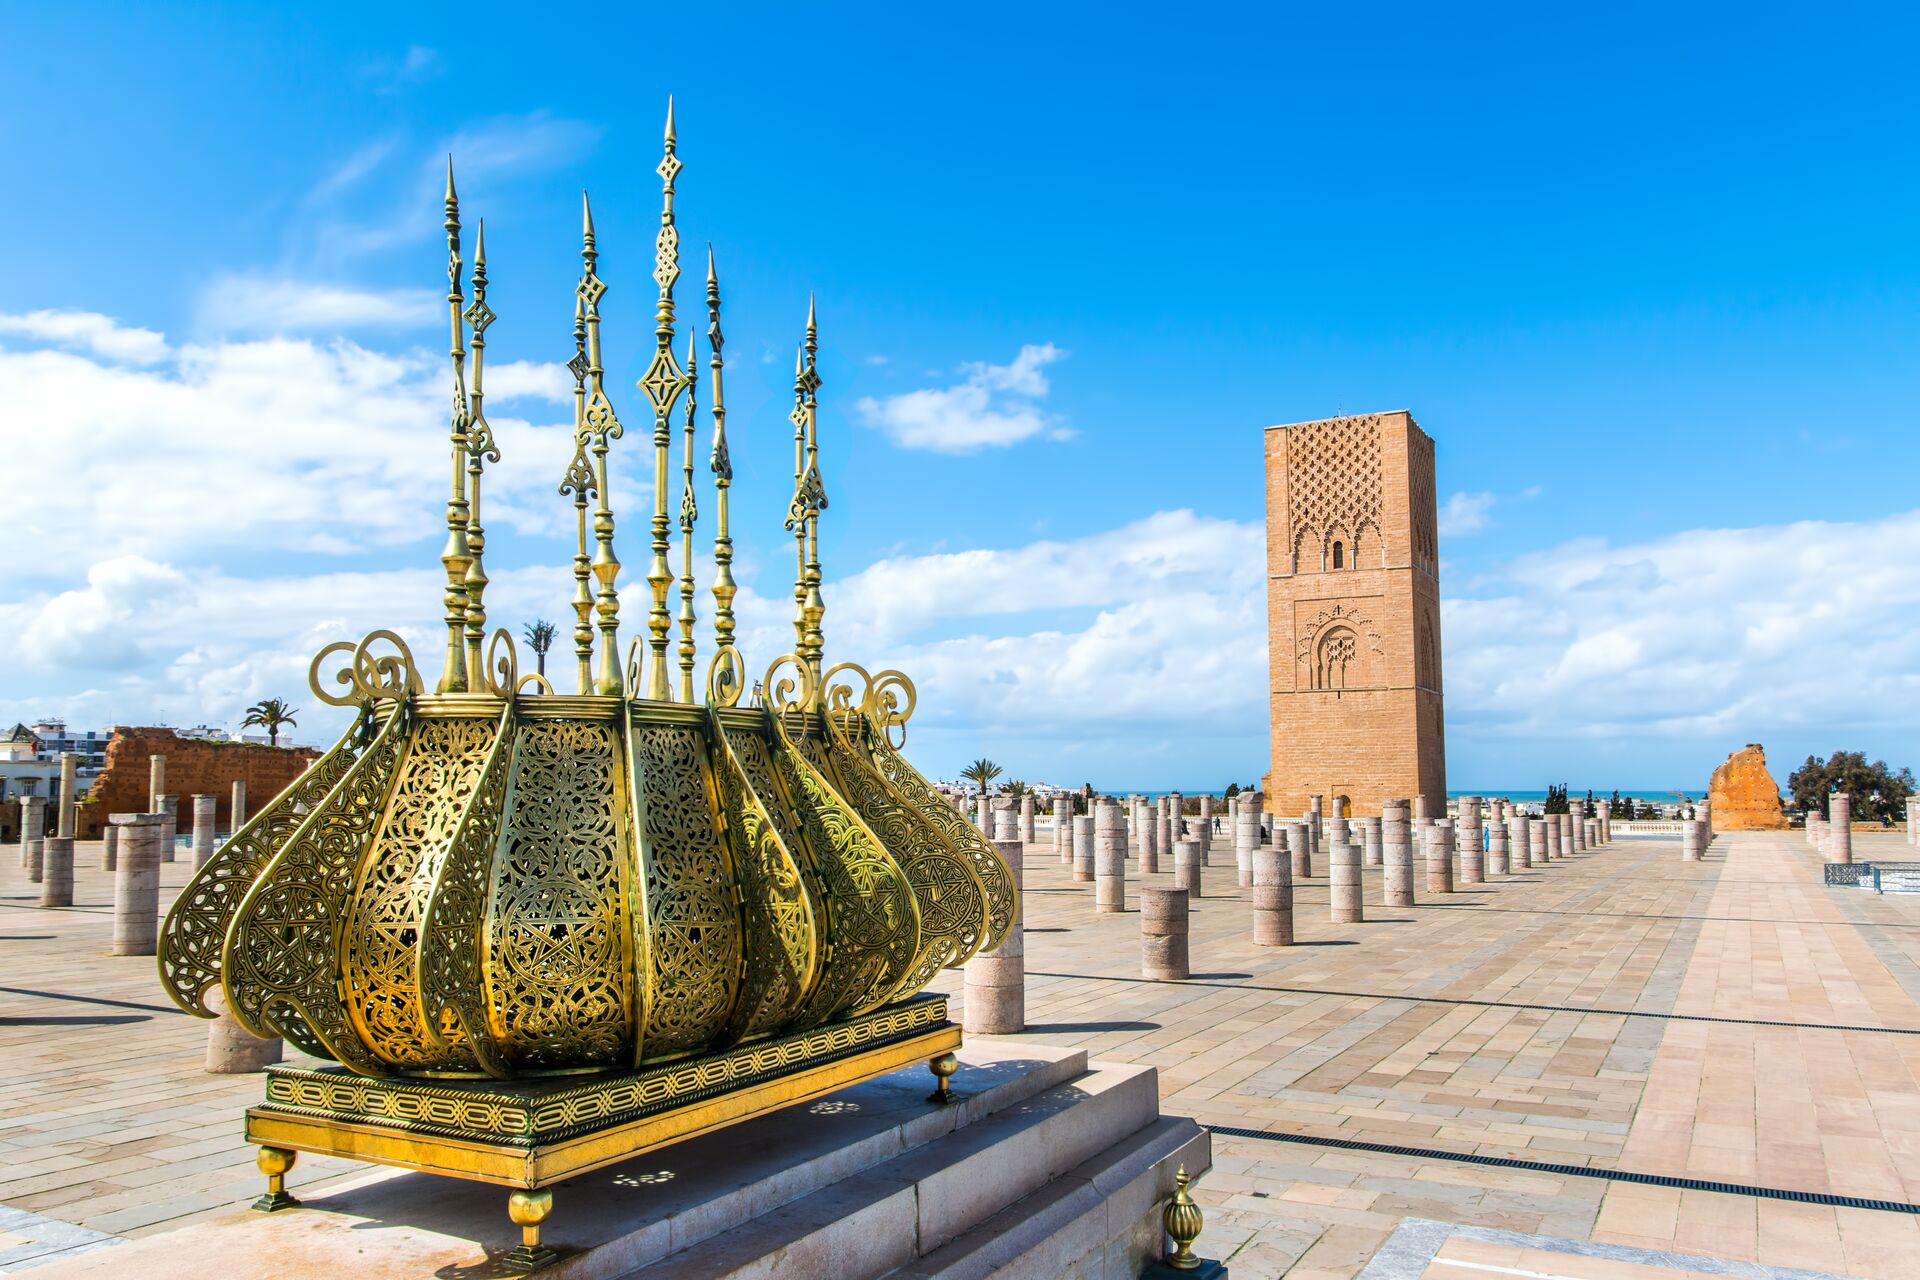 Green and gold ornate Mausoleum of King Mohammad IV shines in the Moroccan sun, situated on a light brick courtyard with a tower in the background and a bright blue sky